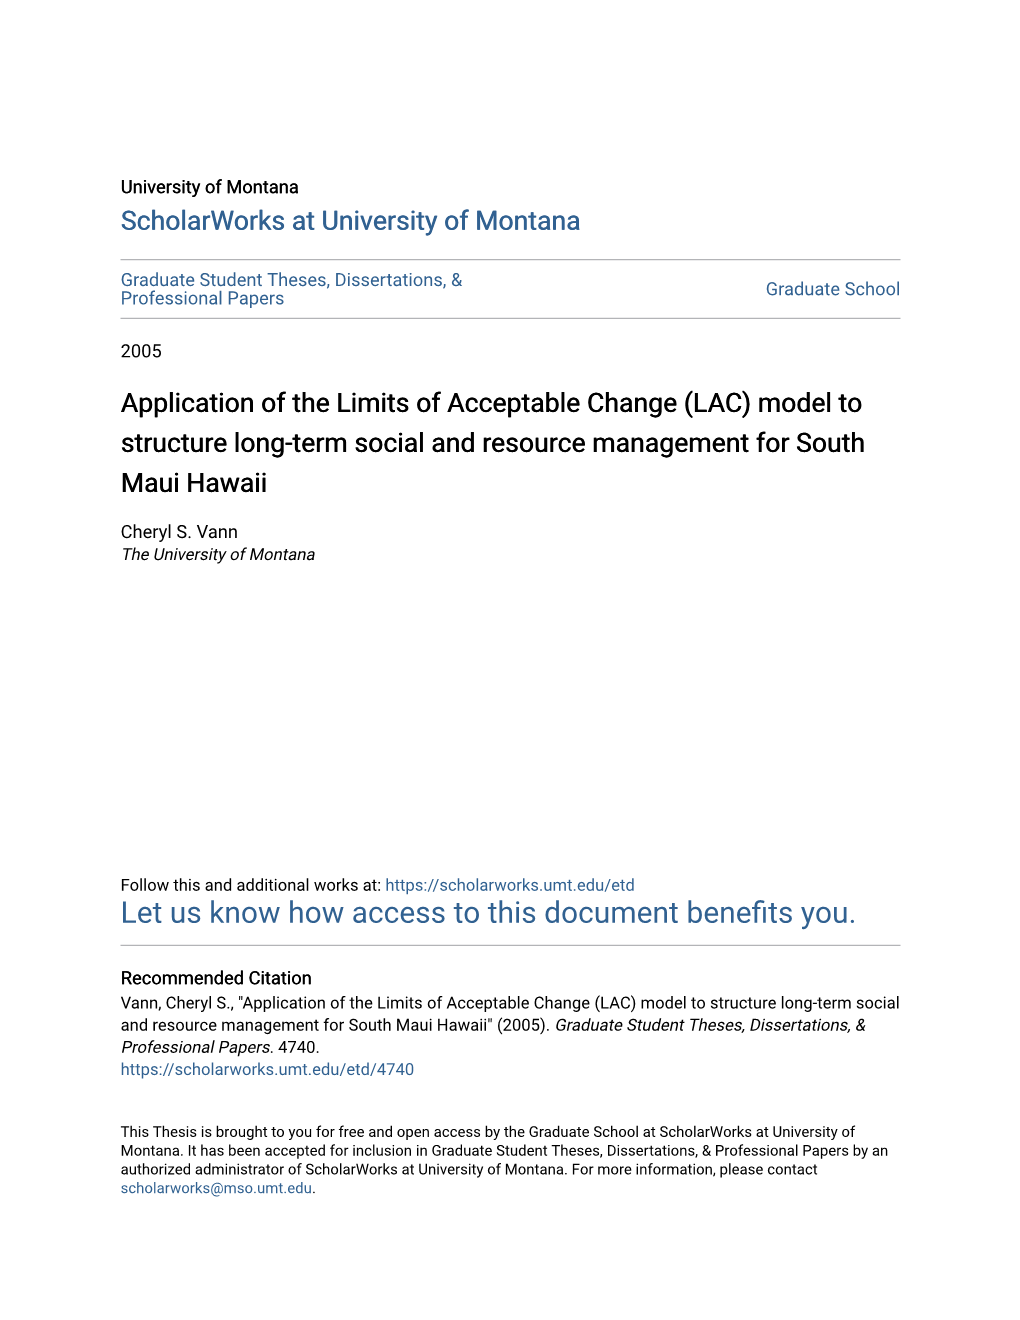 Application of the Limits of Acceptable Change (LAC) Model to Structure Long-Term Social and Resource Management for South Maui Hawaii